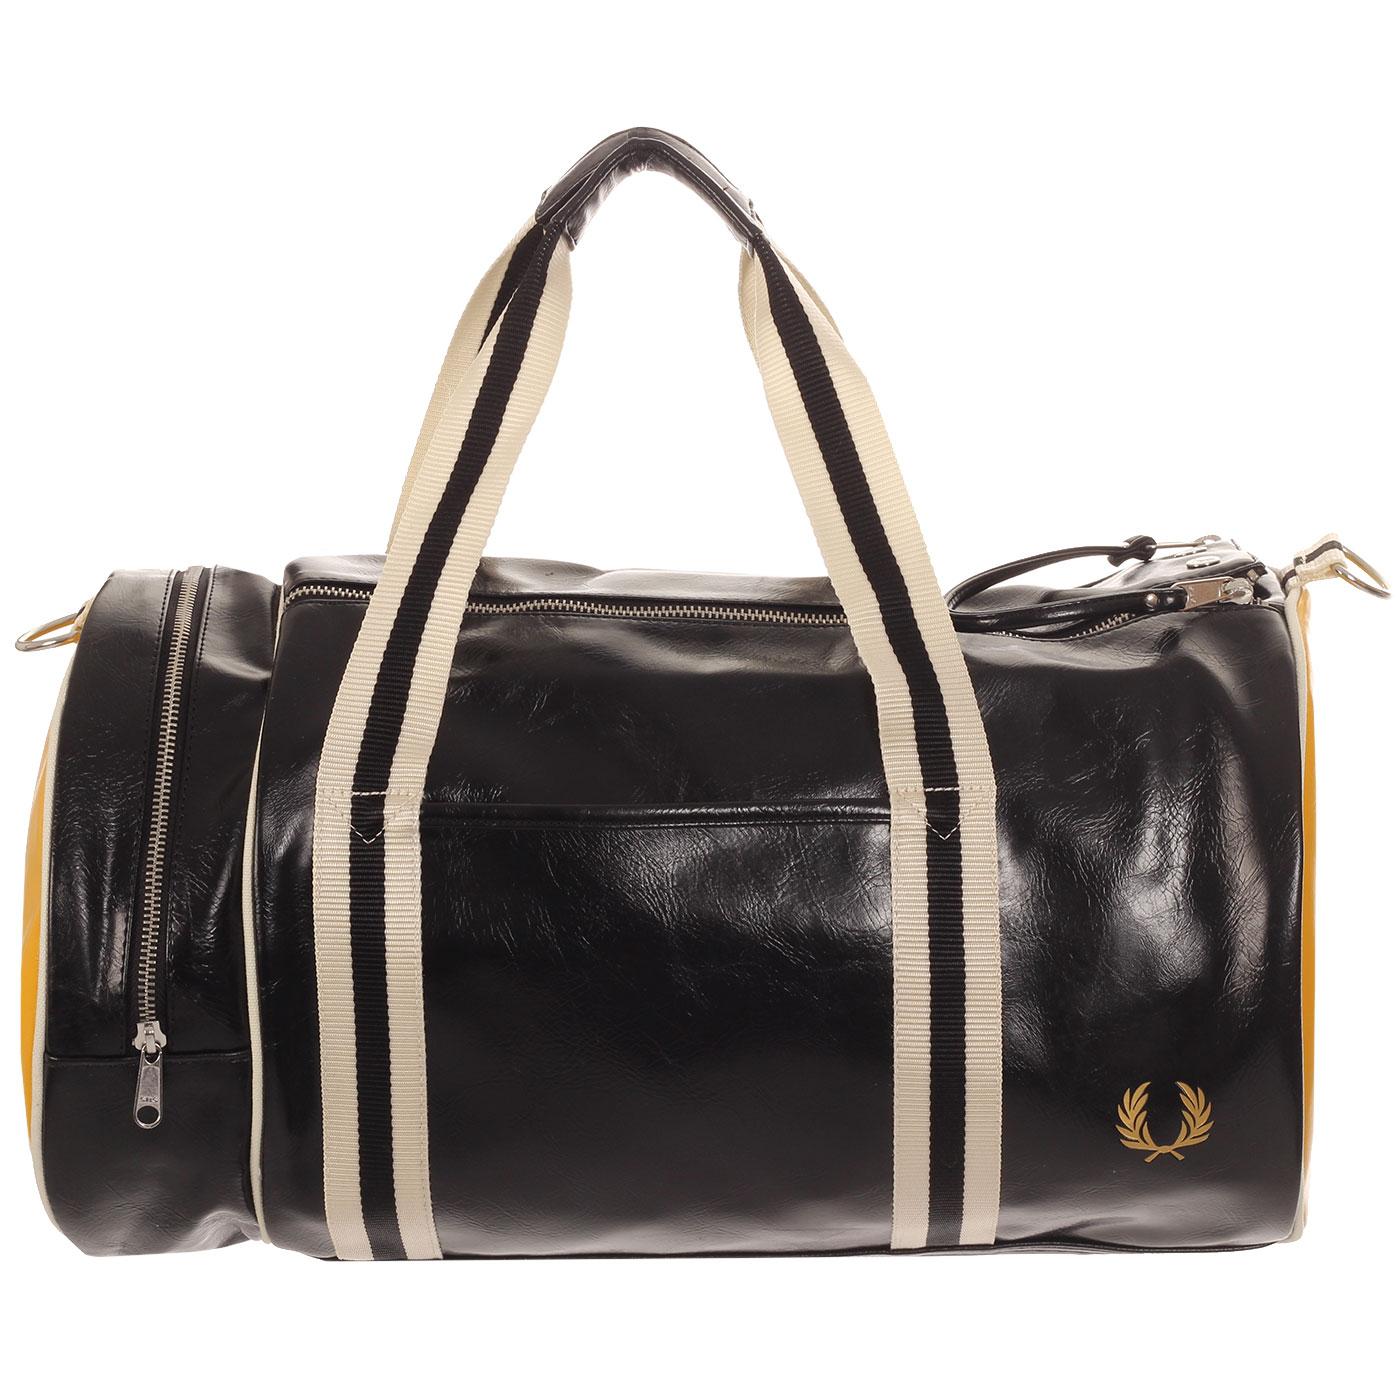 FRED PERRY Classic Retro Barrel Bag in Black & Yellow